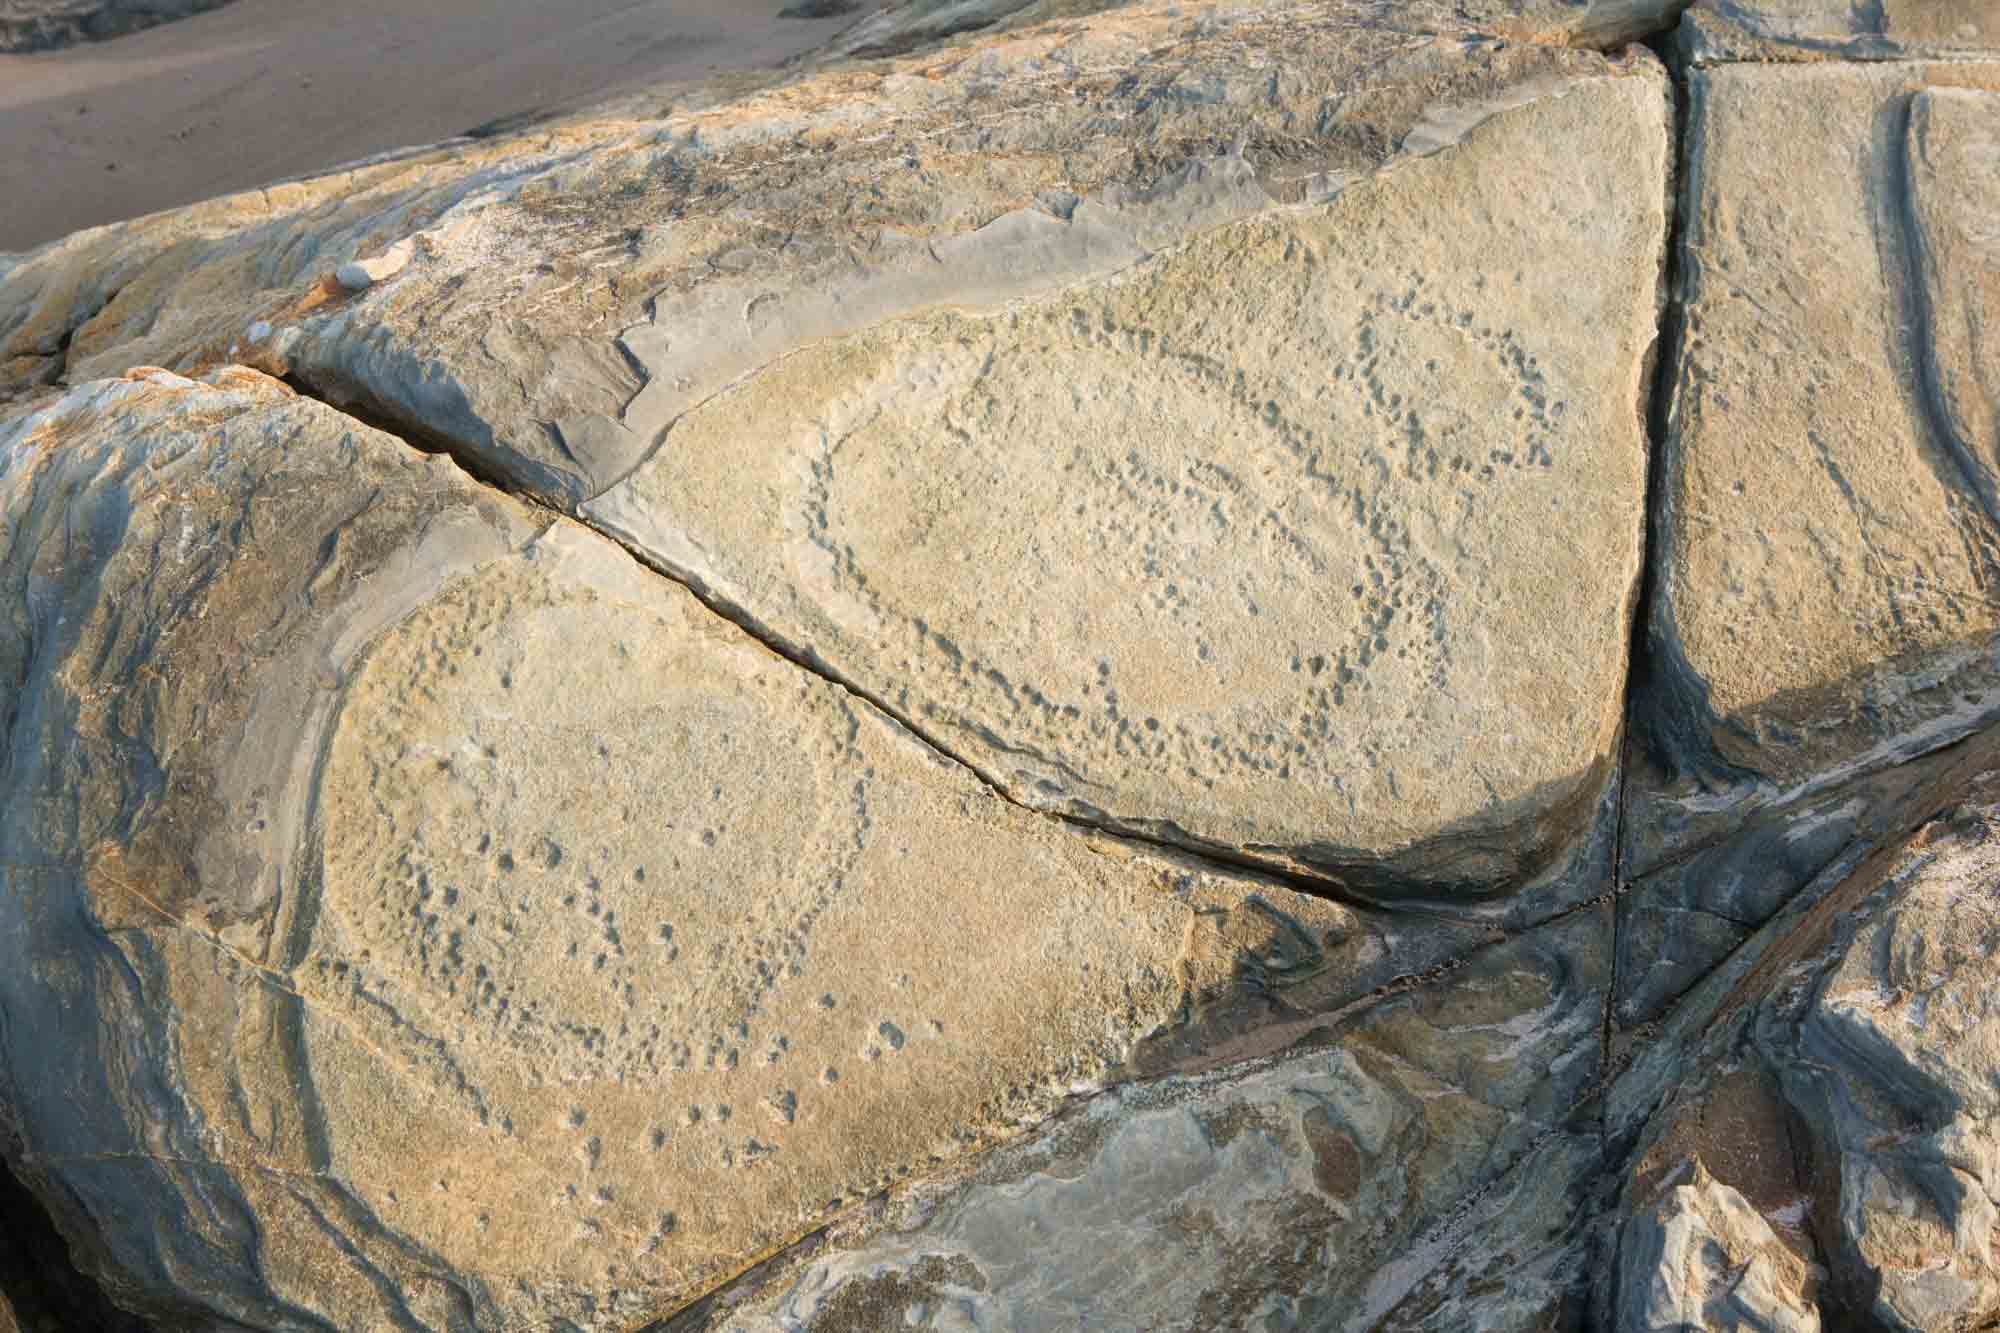 Rock formations featuring circular patterns of dot impressions.